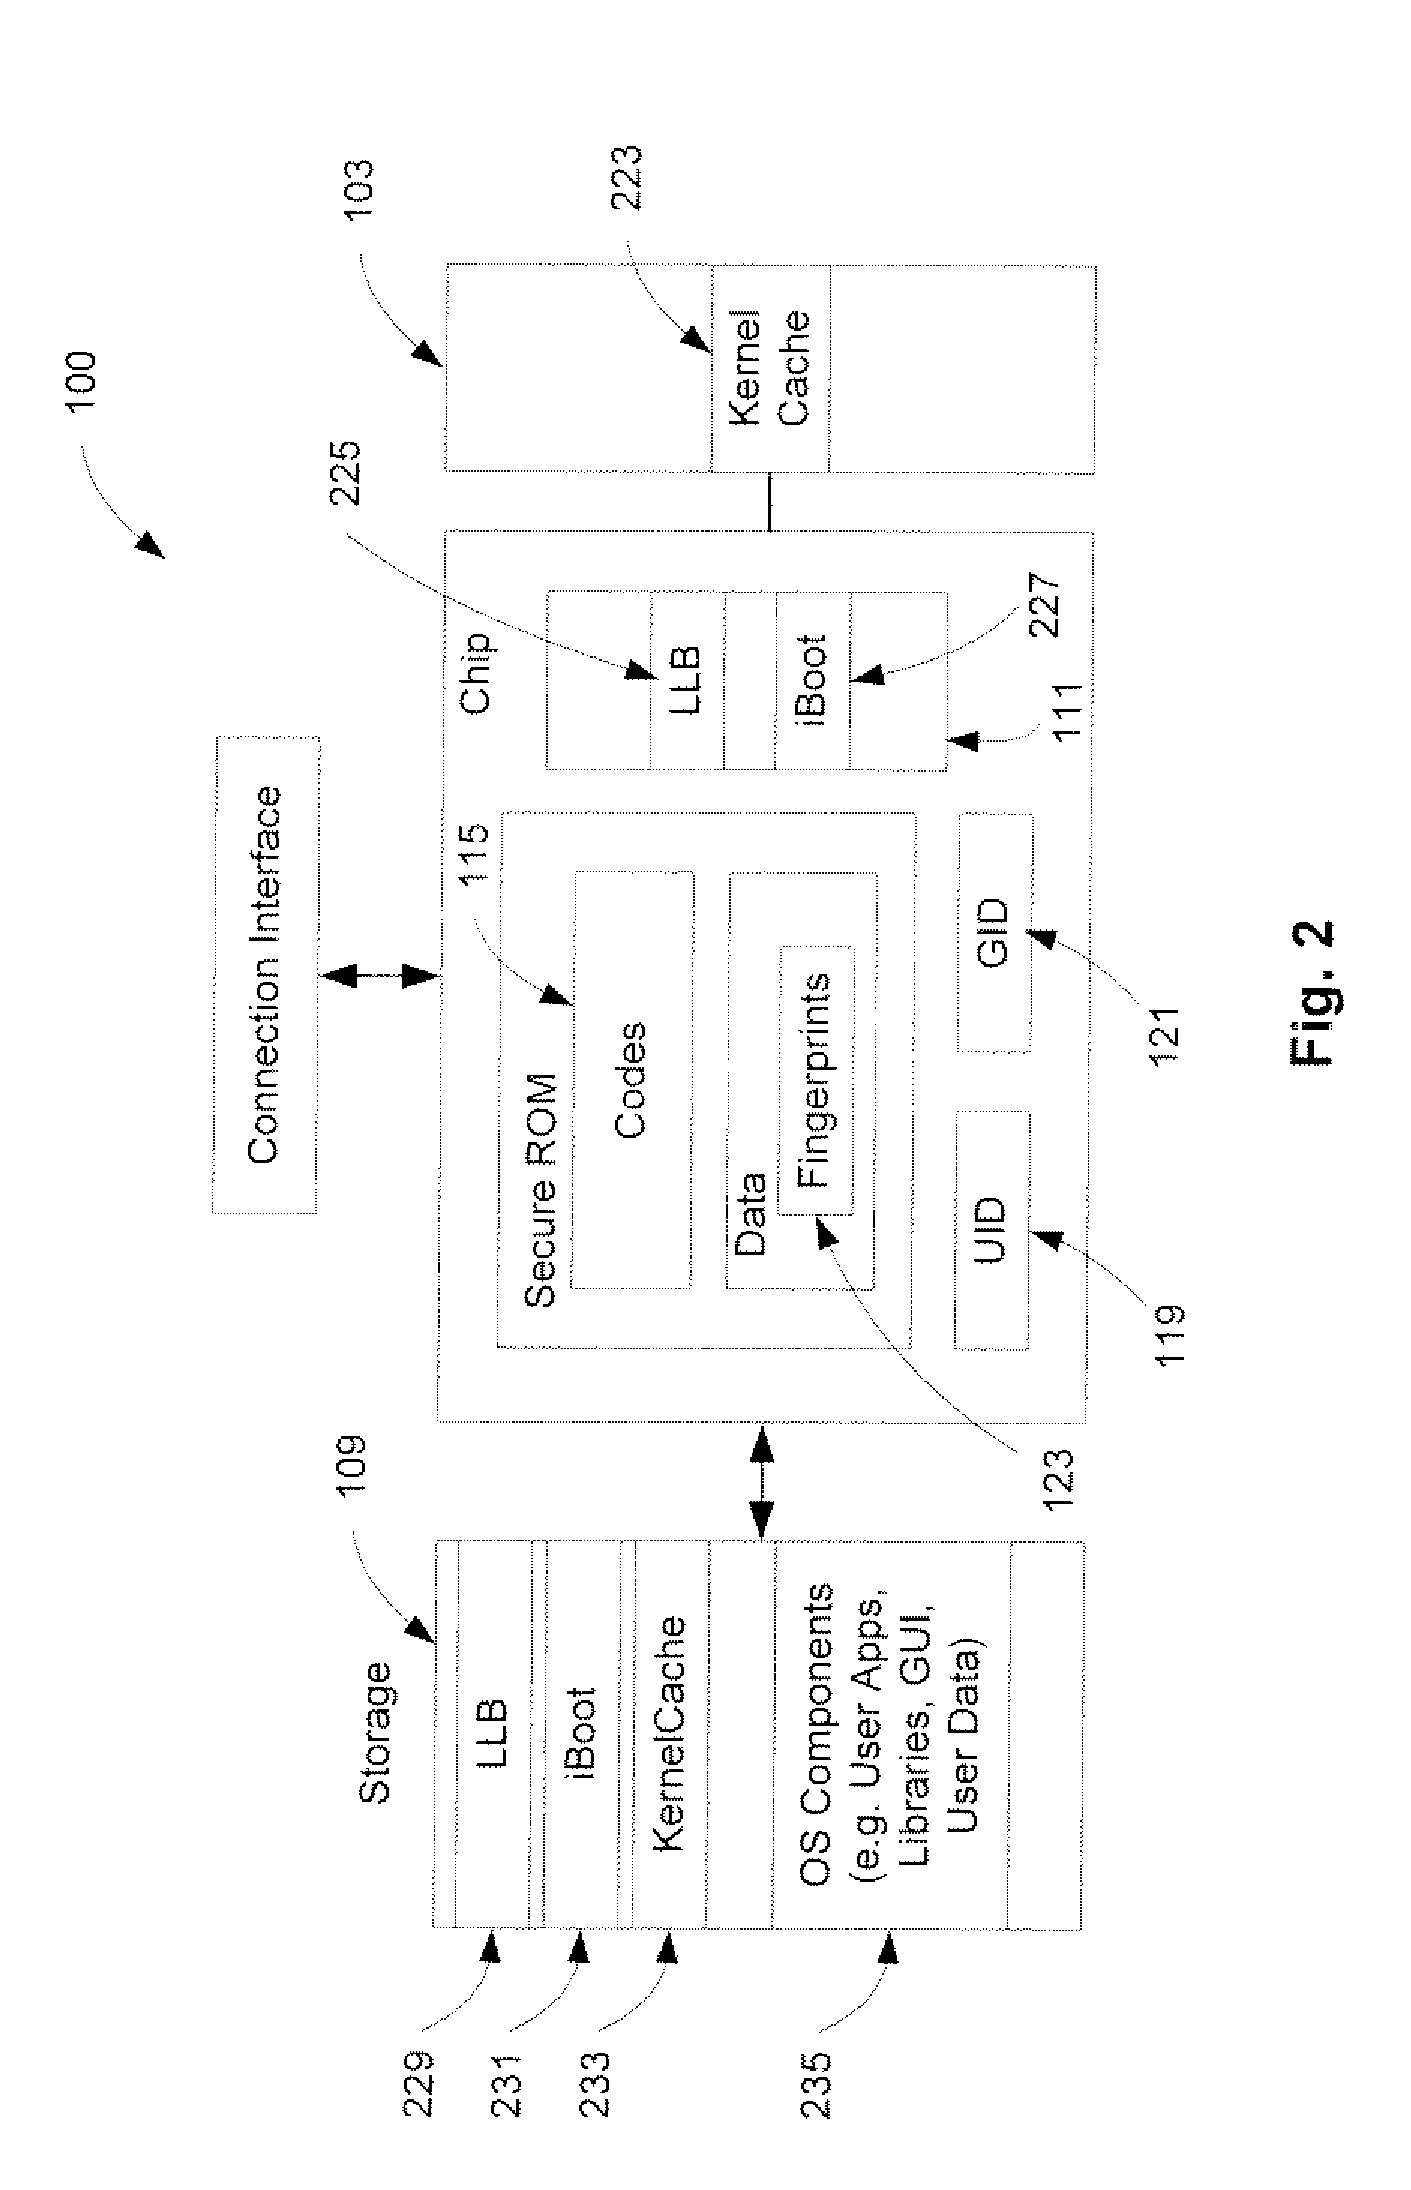 Securely Recovering a Computing Device